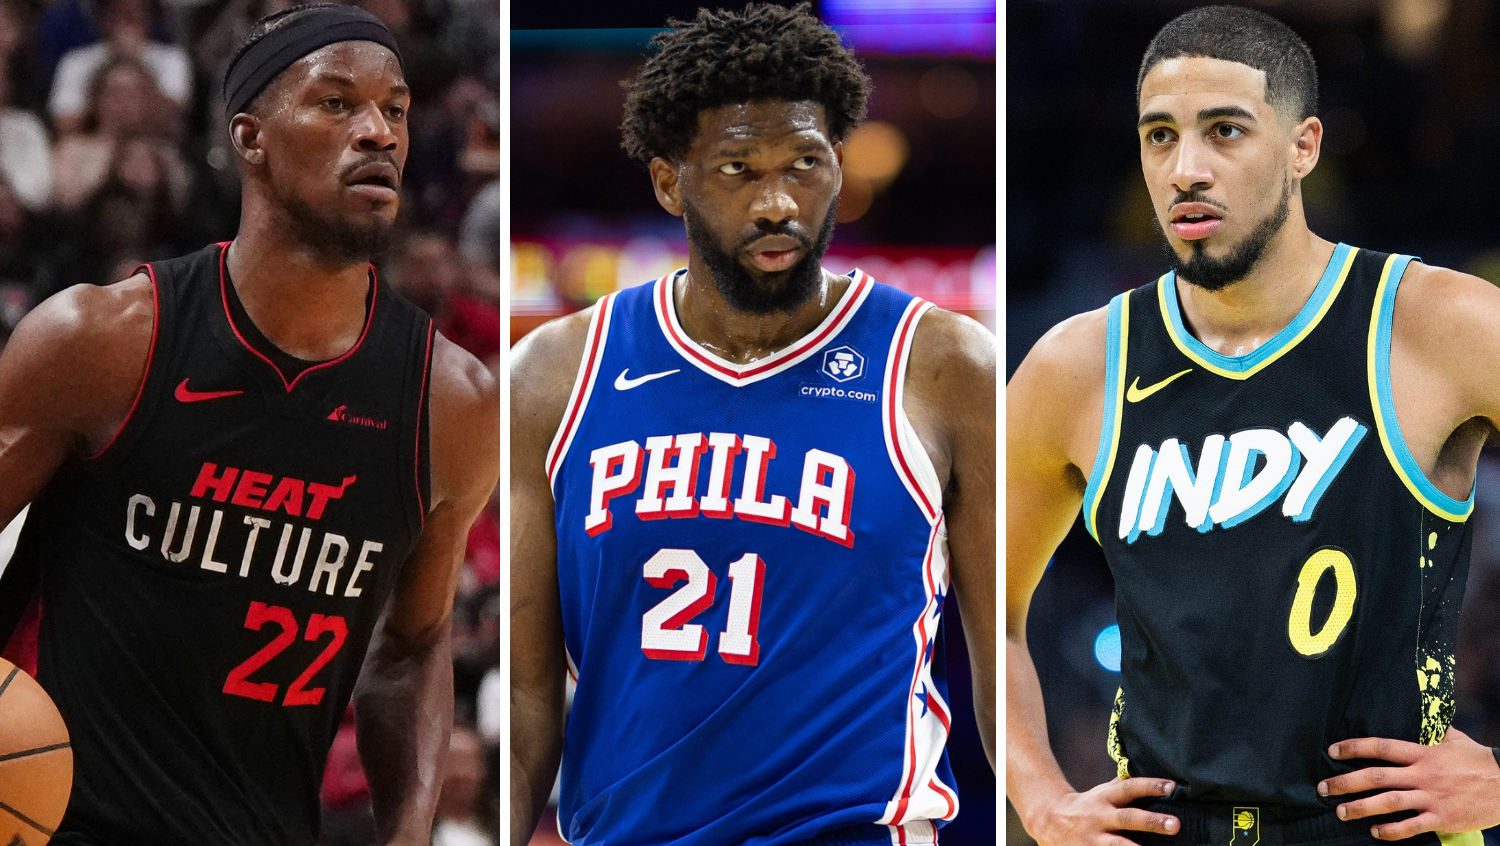 The NBA has big winners and losers from a quiet trade deadline